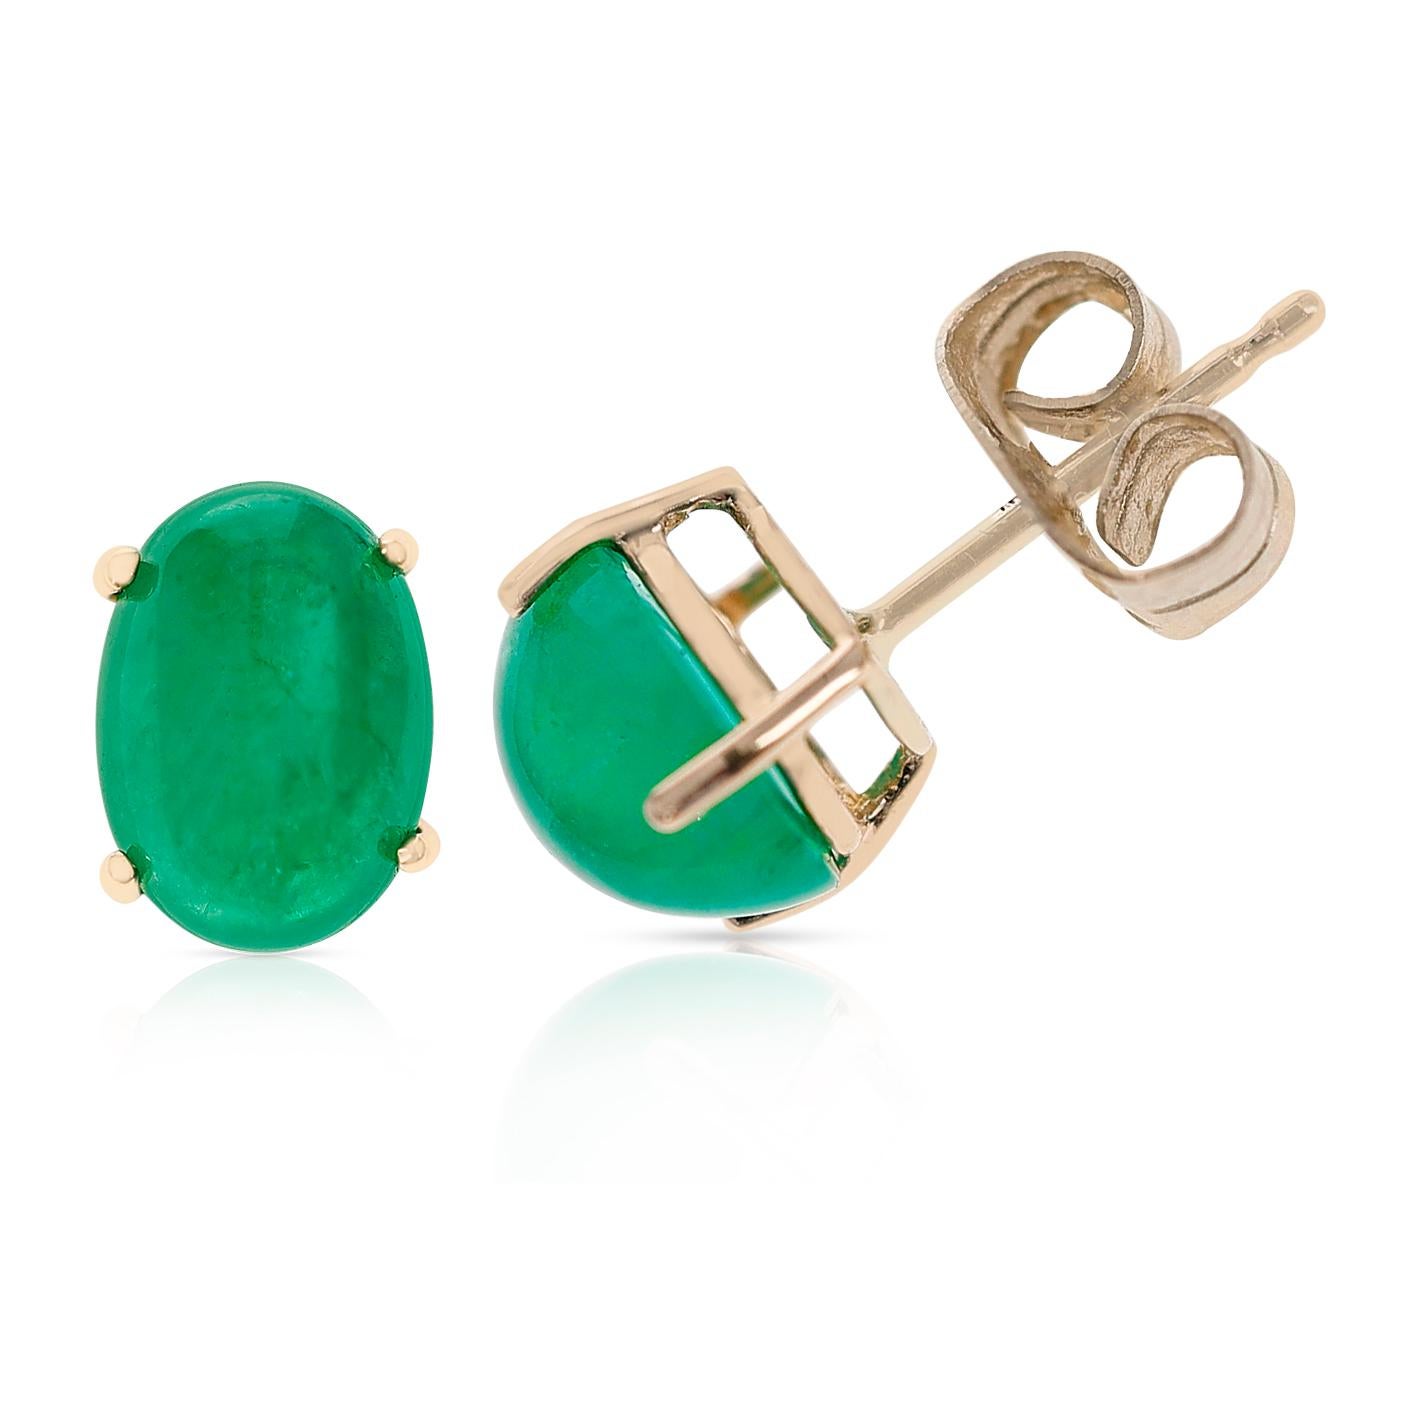 A pair of 7 x 5 MM Emerald Oval Cabochon Stud Earrings made in 14 Karat Yellow Gold. The total stone weight ranges from approximately  1.44 - 1.46 carats.
